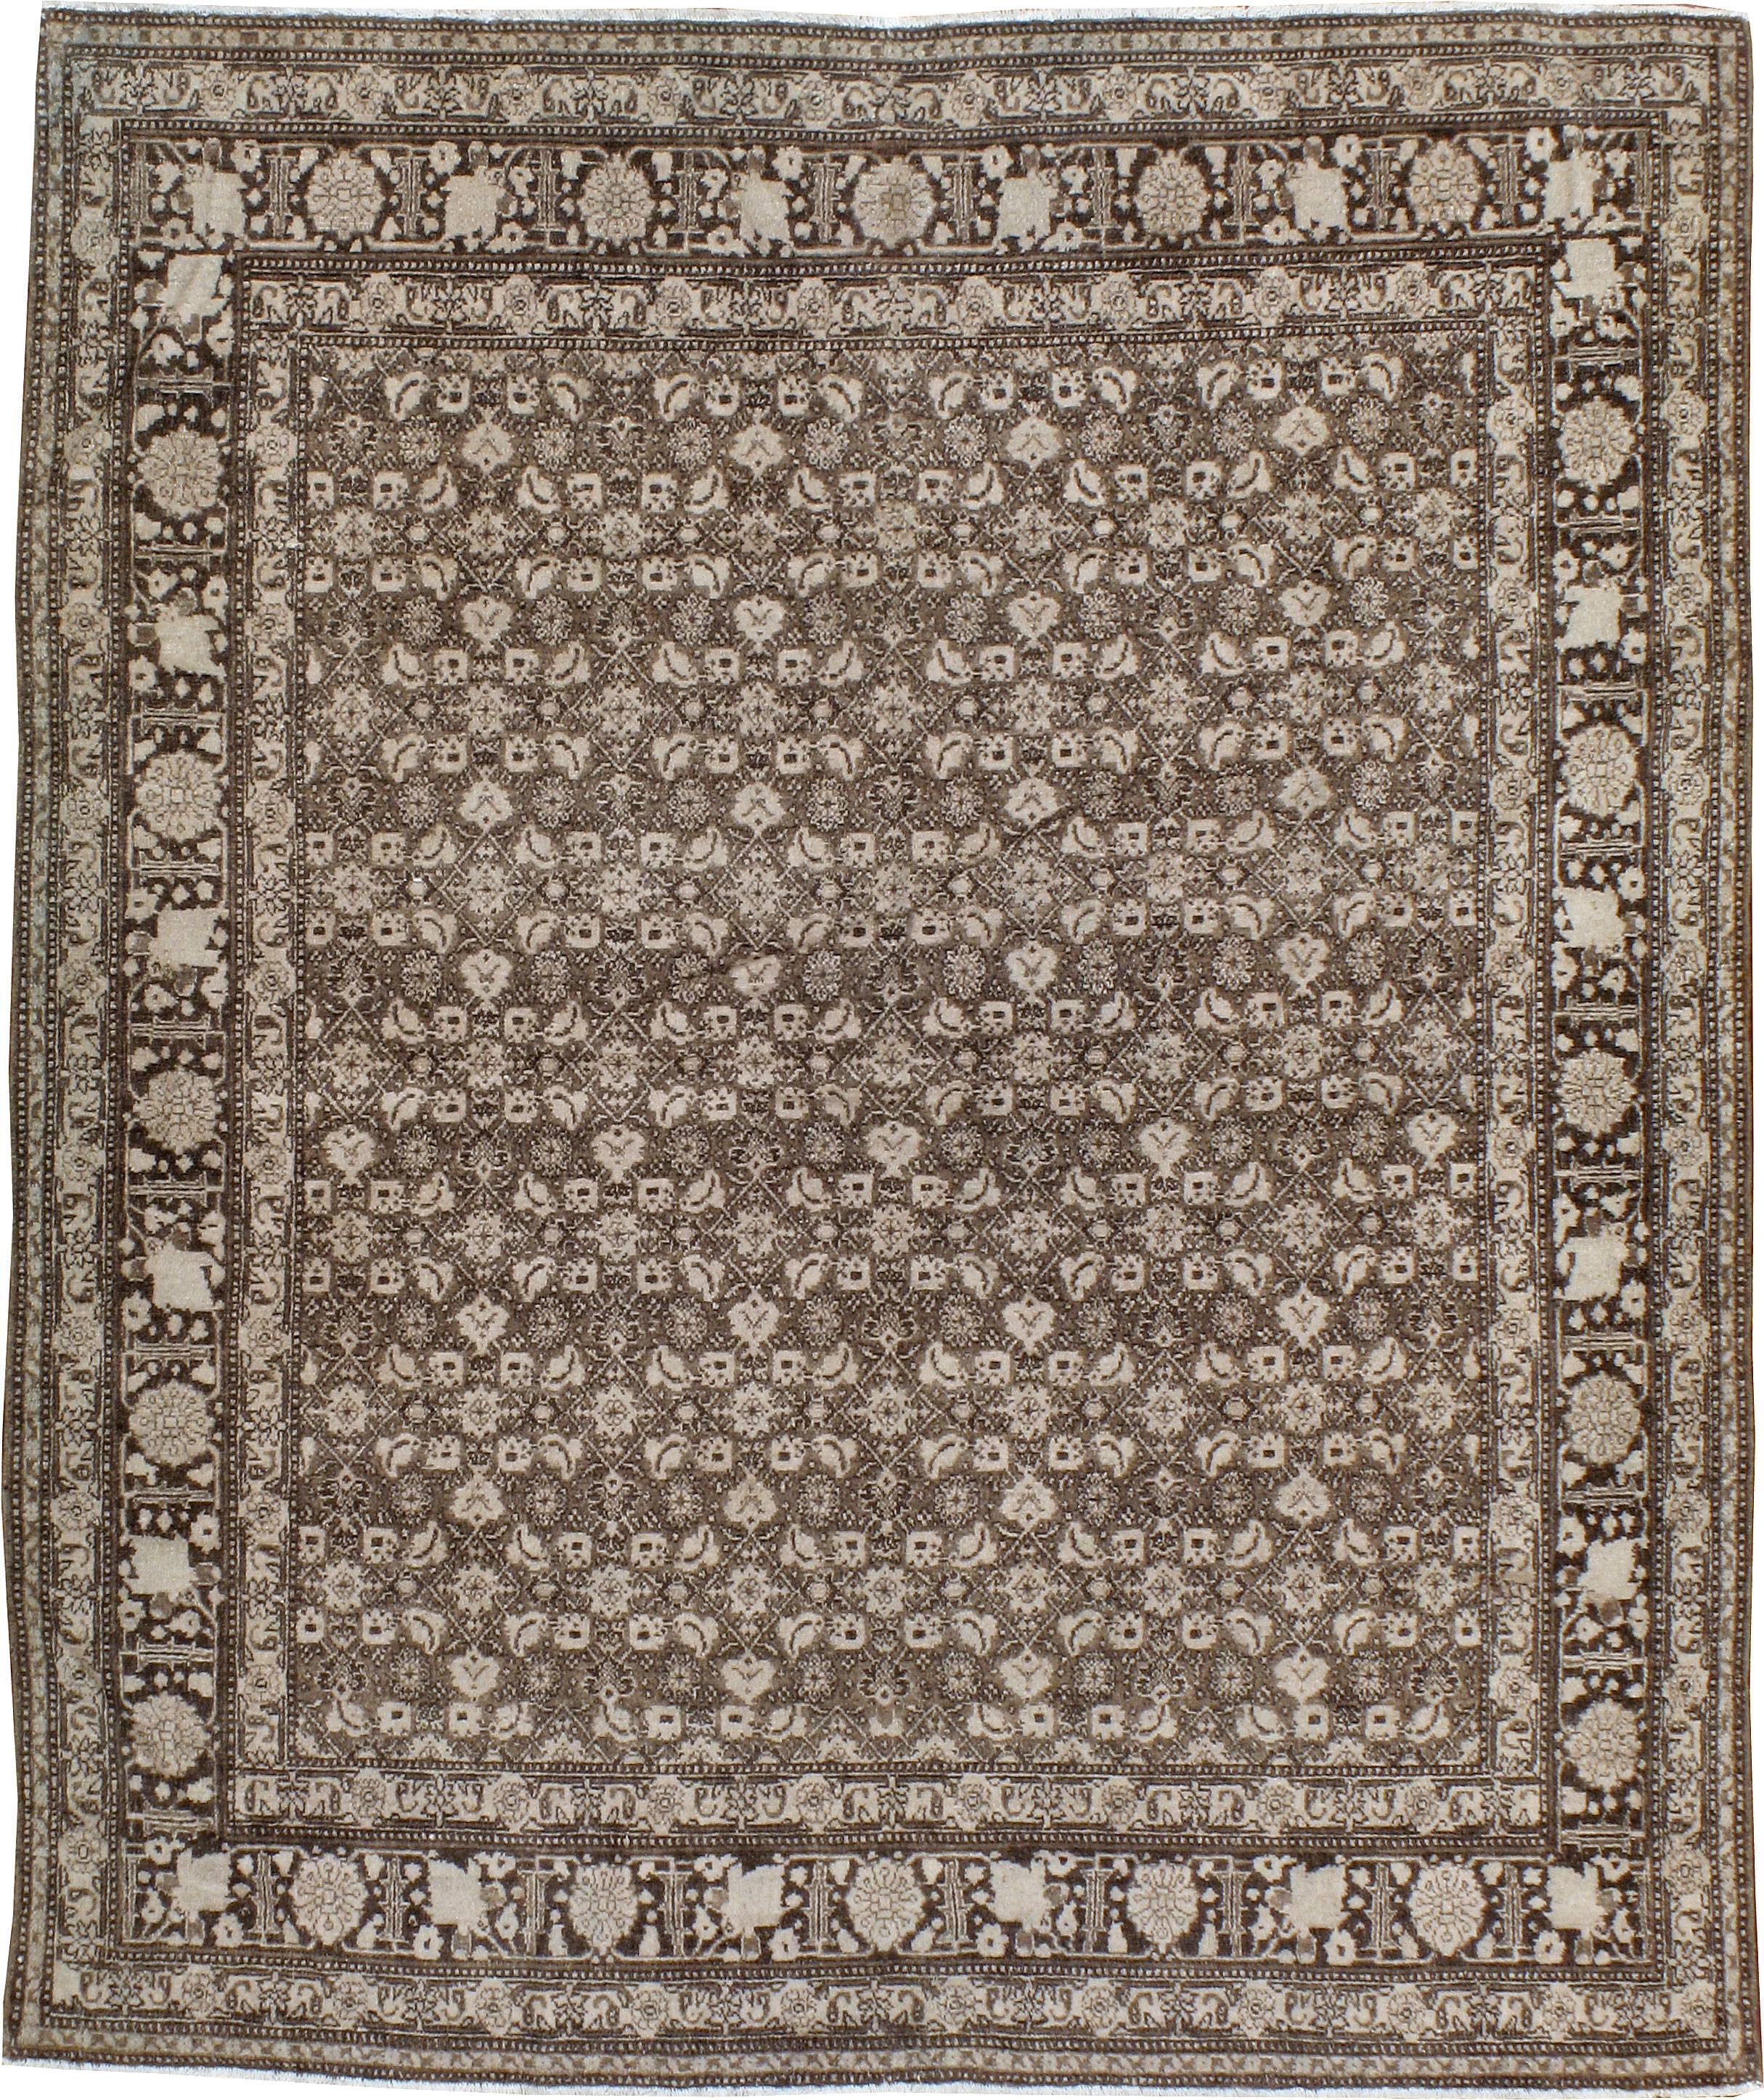 An antique Persian Senneh Tabriz carpet from the first quarter of the 20th century.